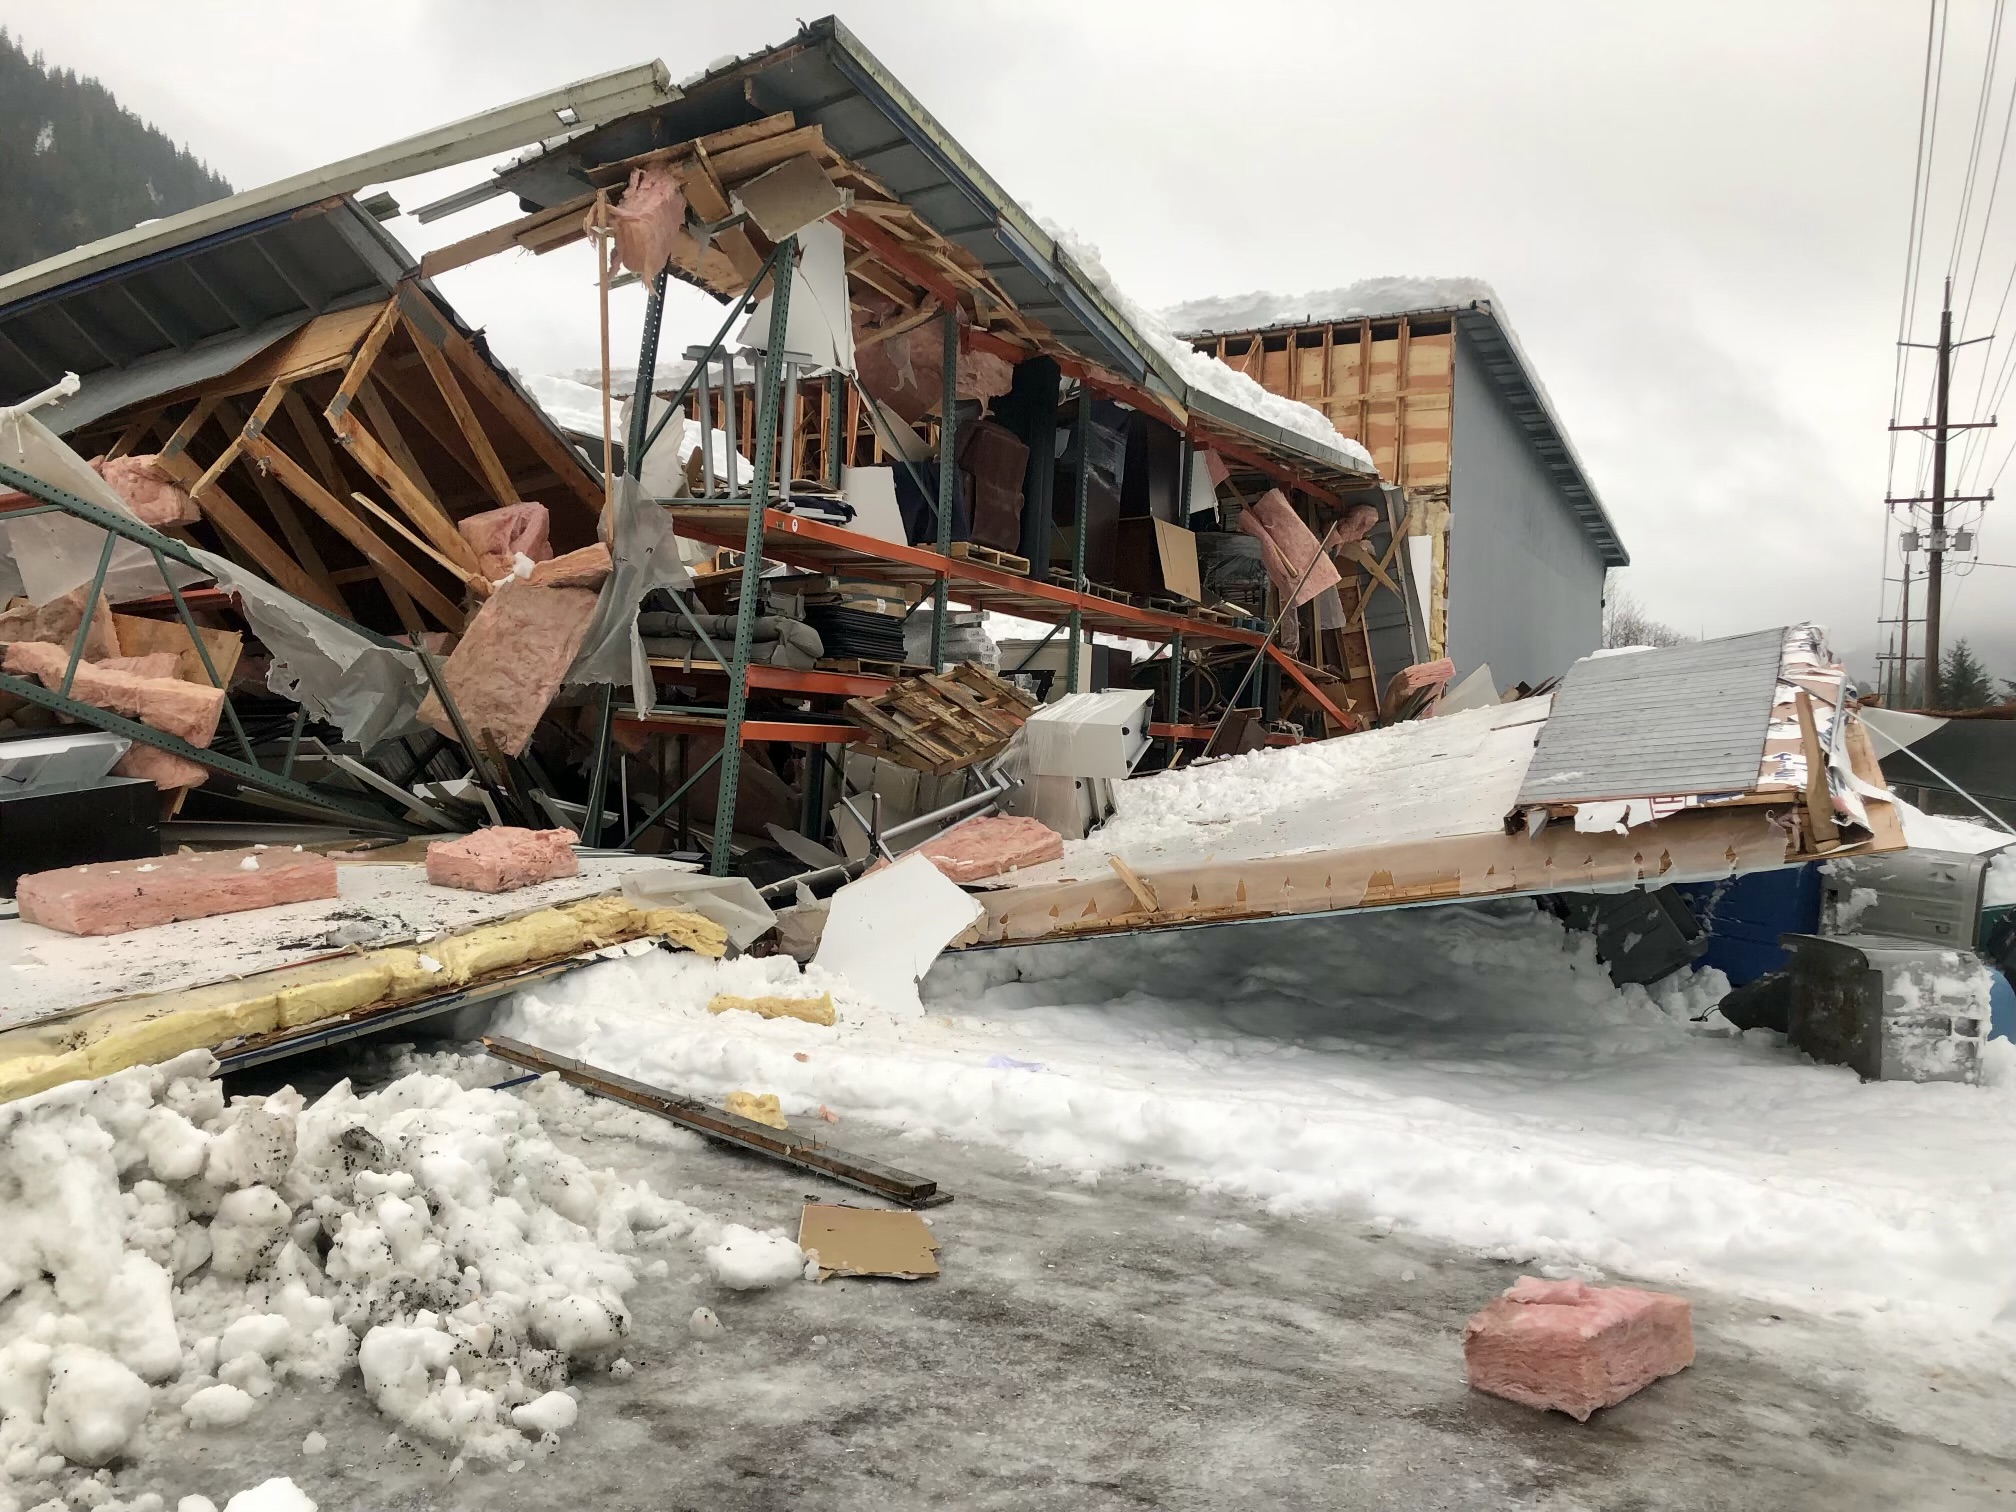 No injuries after two buildings' roofs collapse in Juneau